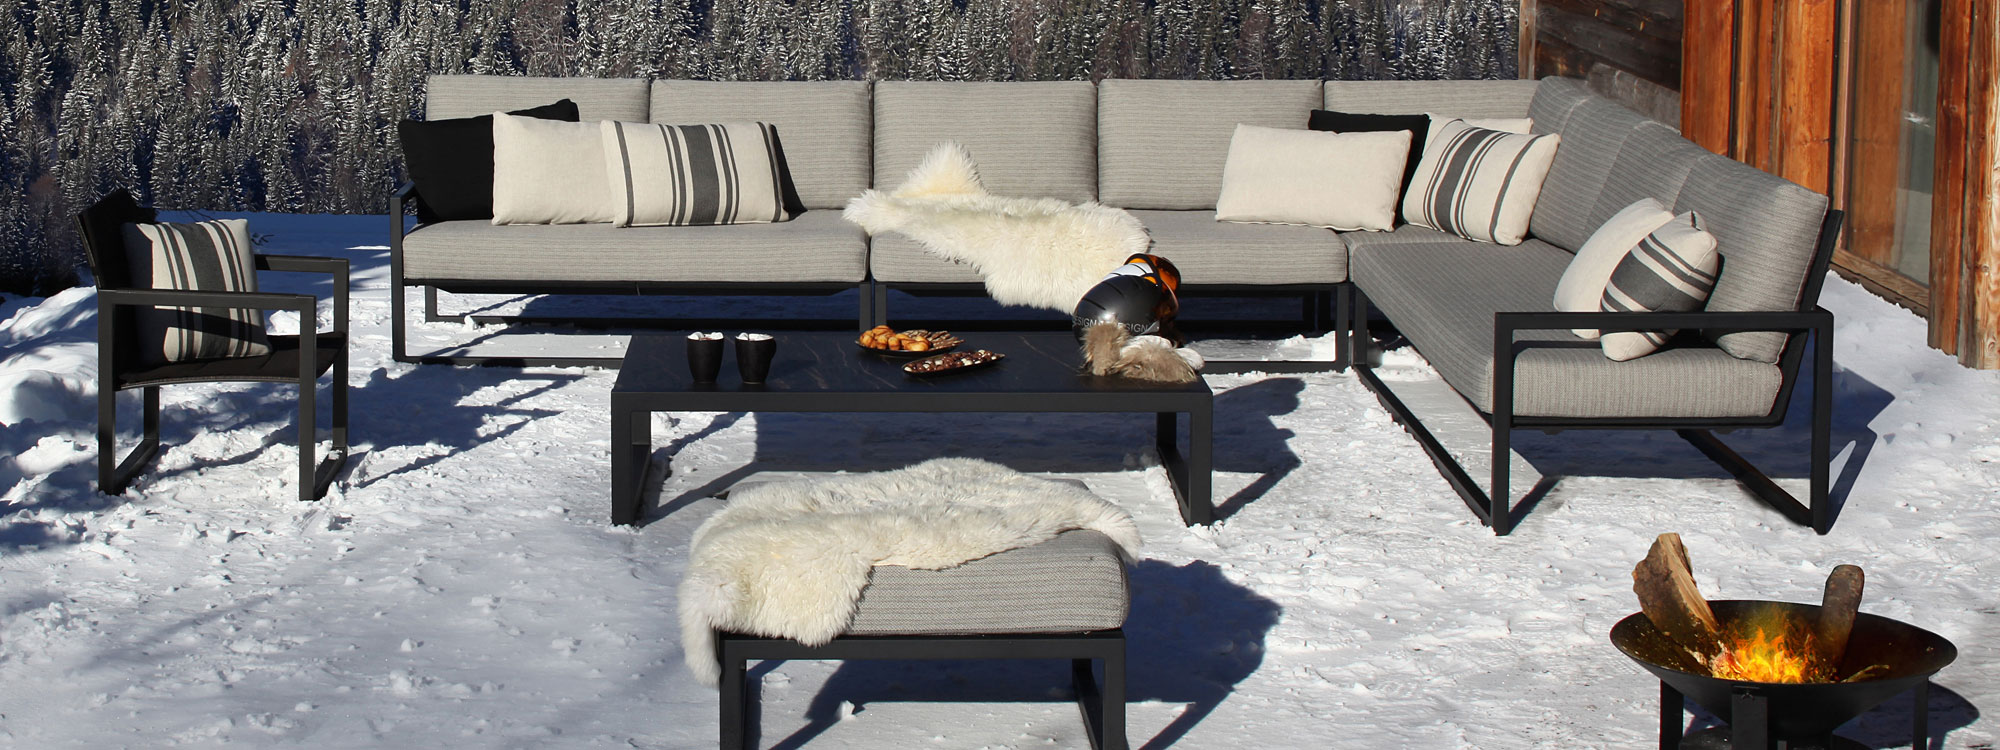 Image of black Ninix furniture with grey upholstery on snowy terrace from Encompass Furniture